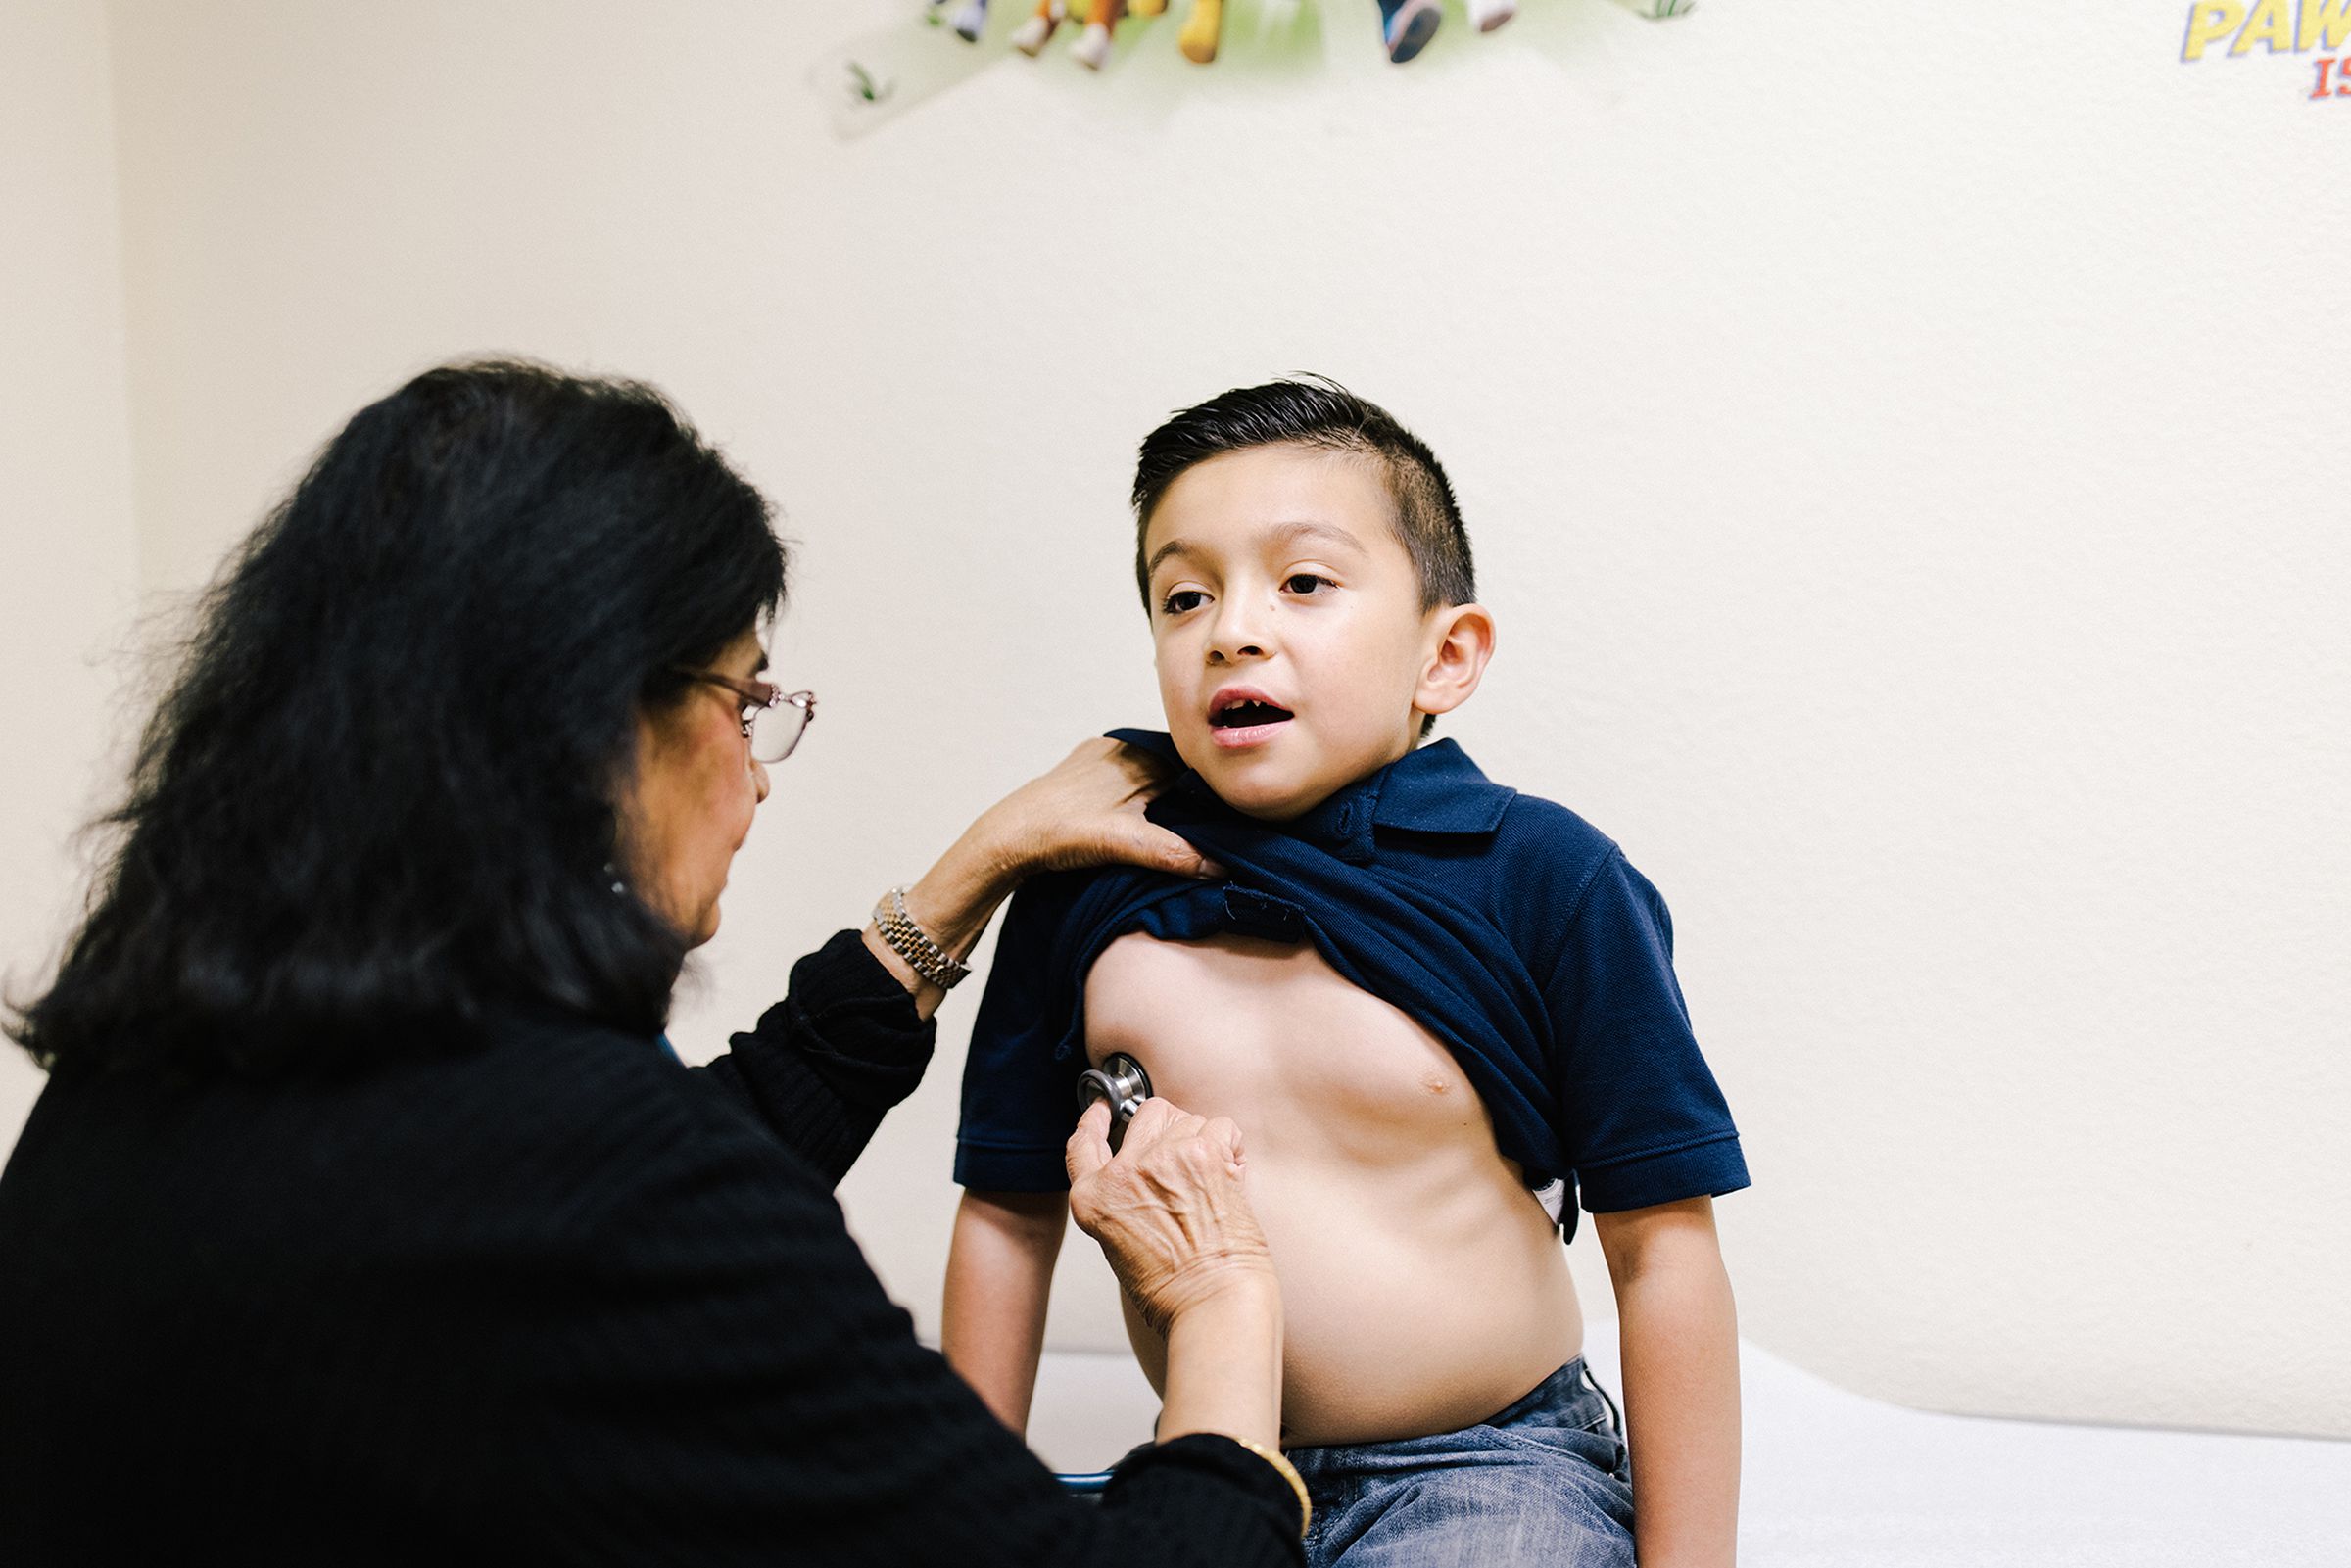 Benito Rodriguez, age 6, gets a check-up after being hospitalized for several days at El Centro Regional Medical with a virus that triggered his asthma.